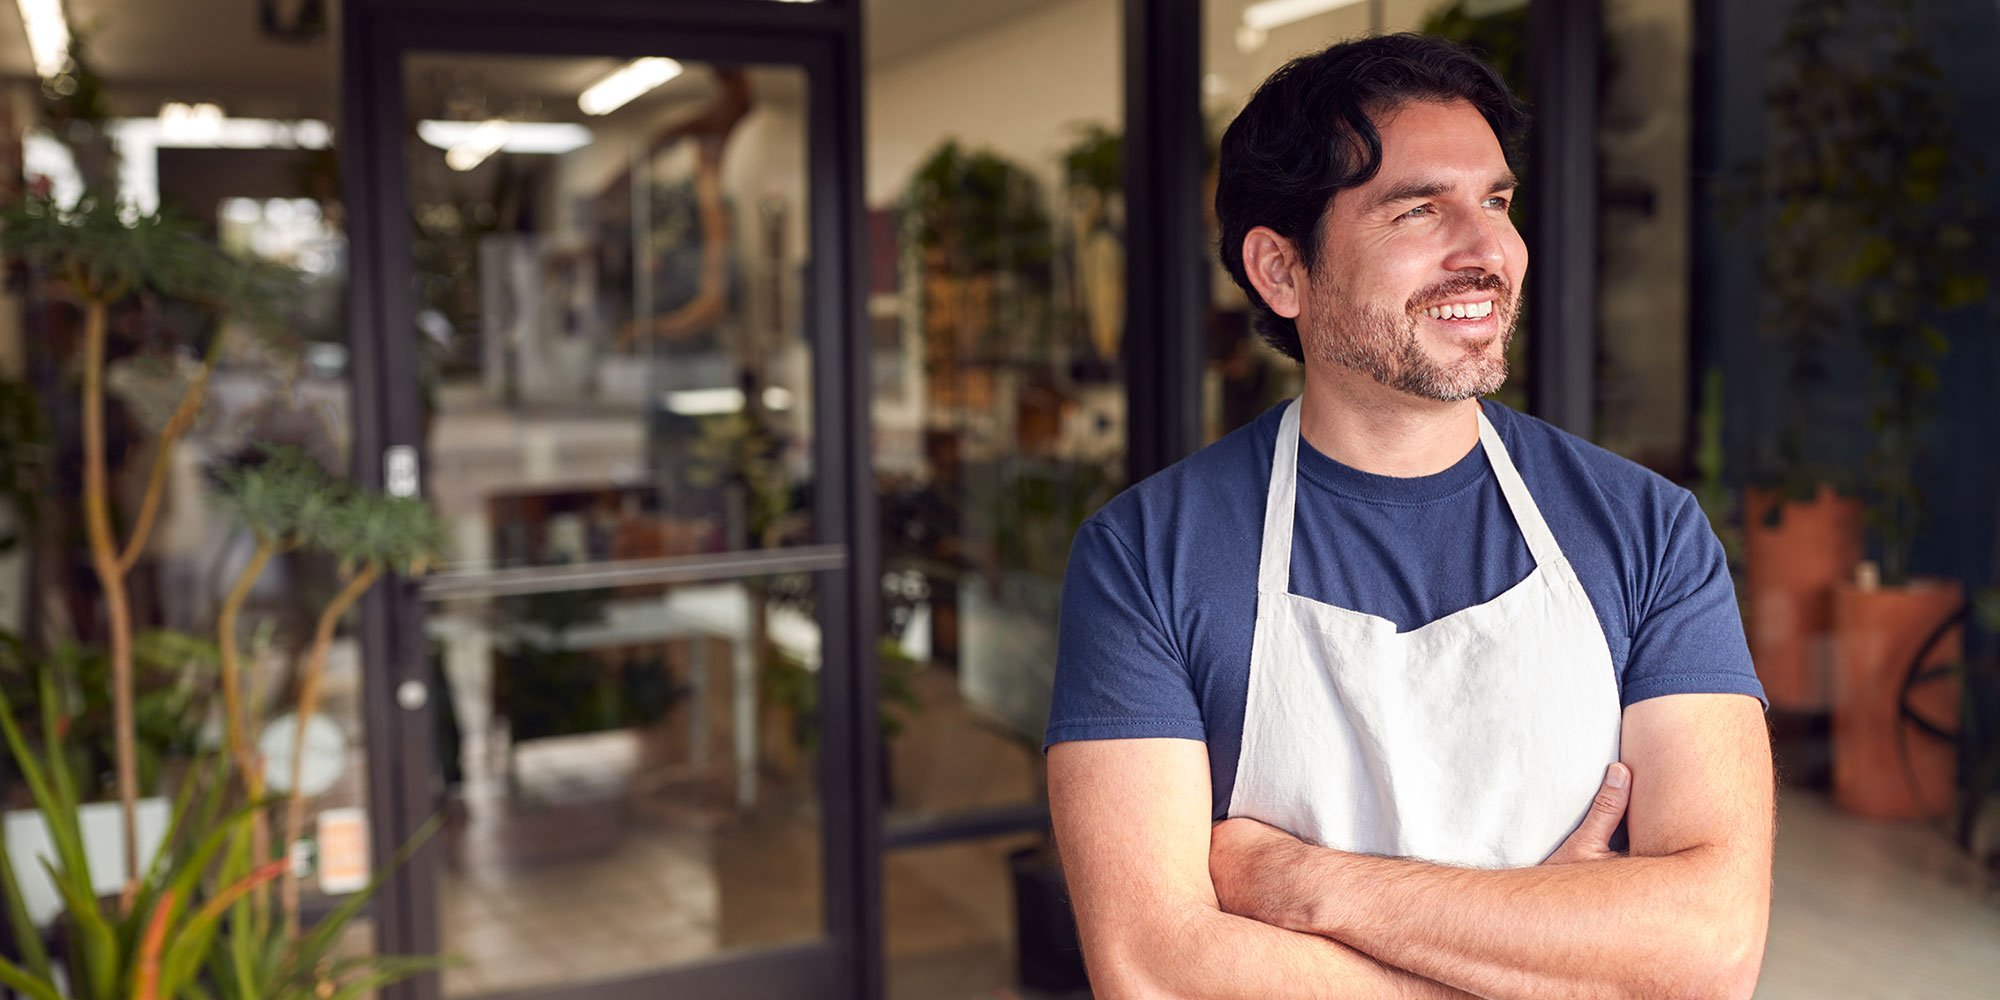 How to Franchise Your Business & 11 Advantages and Disadvantages of Franchising